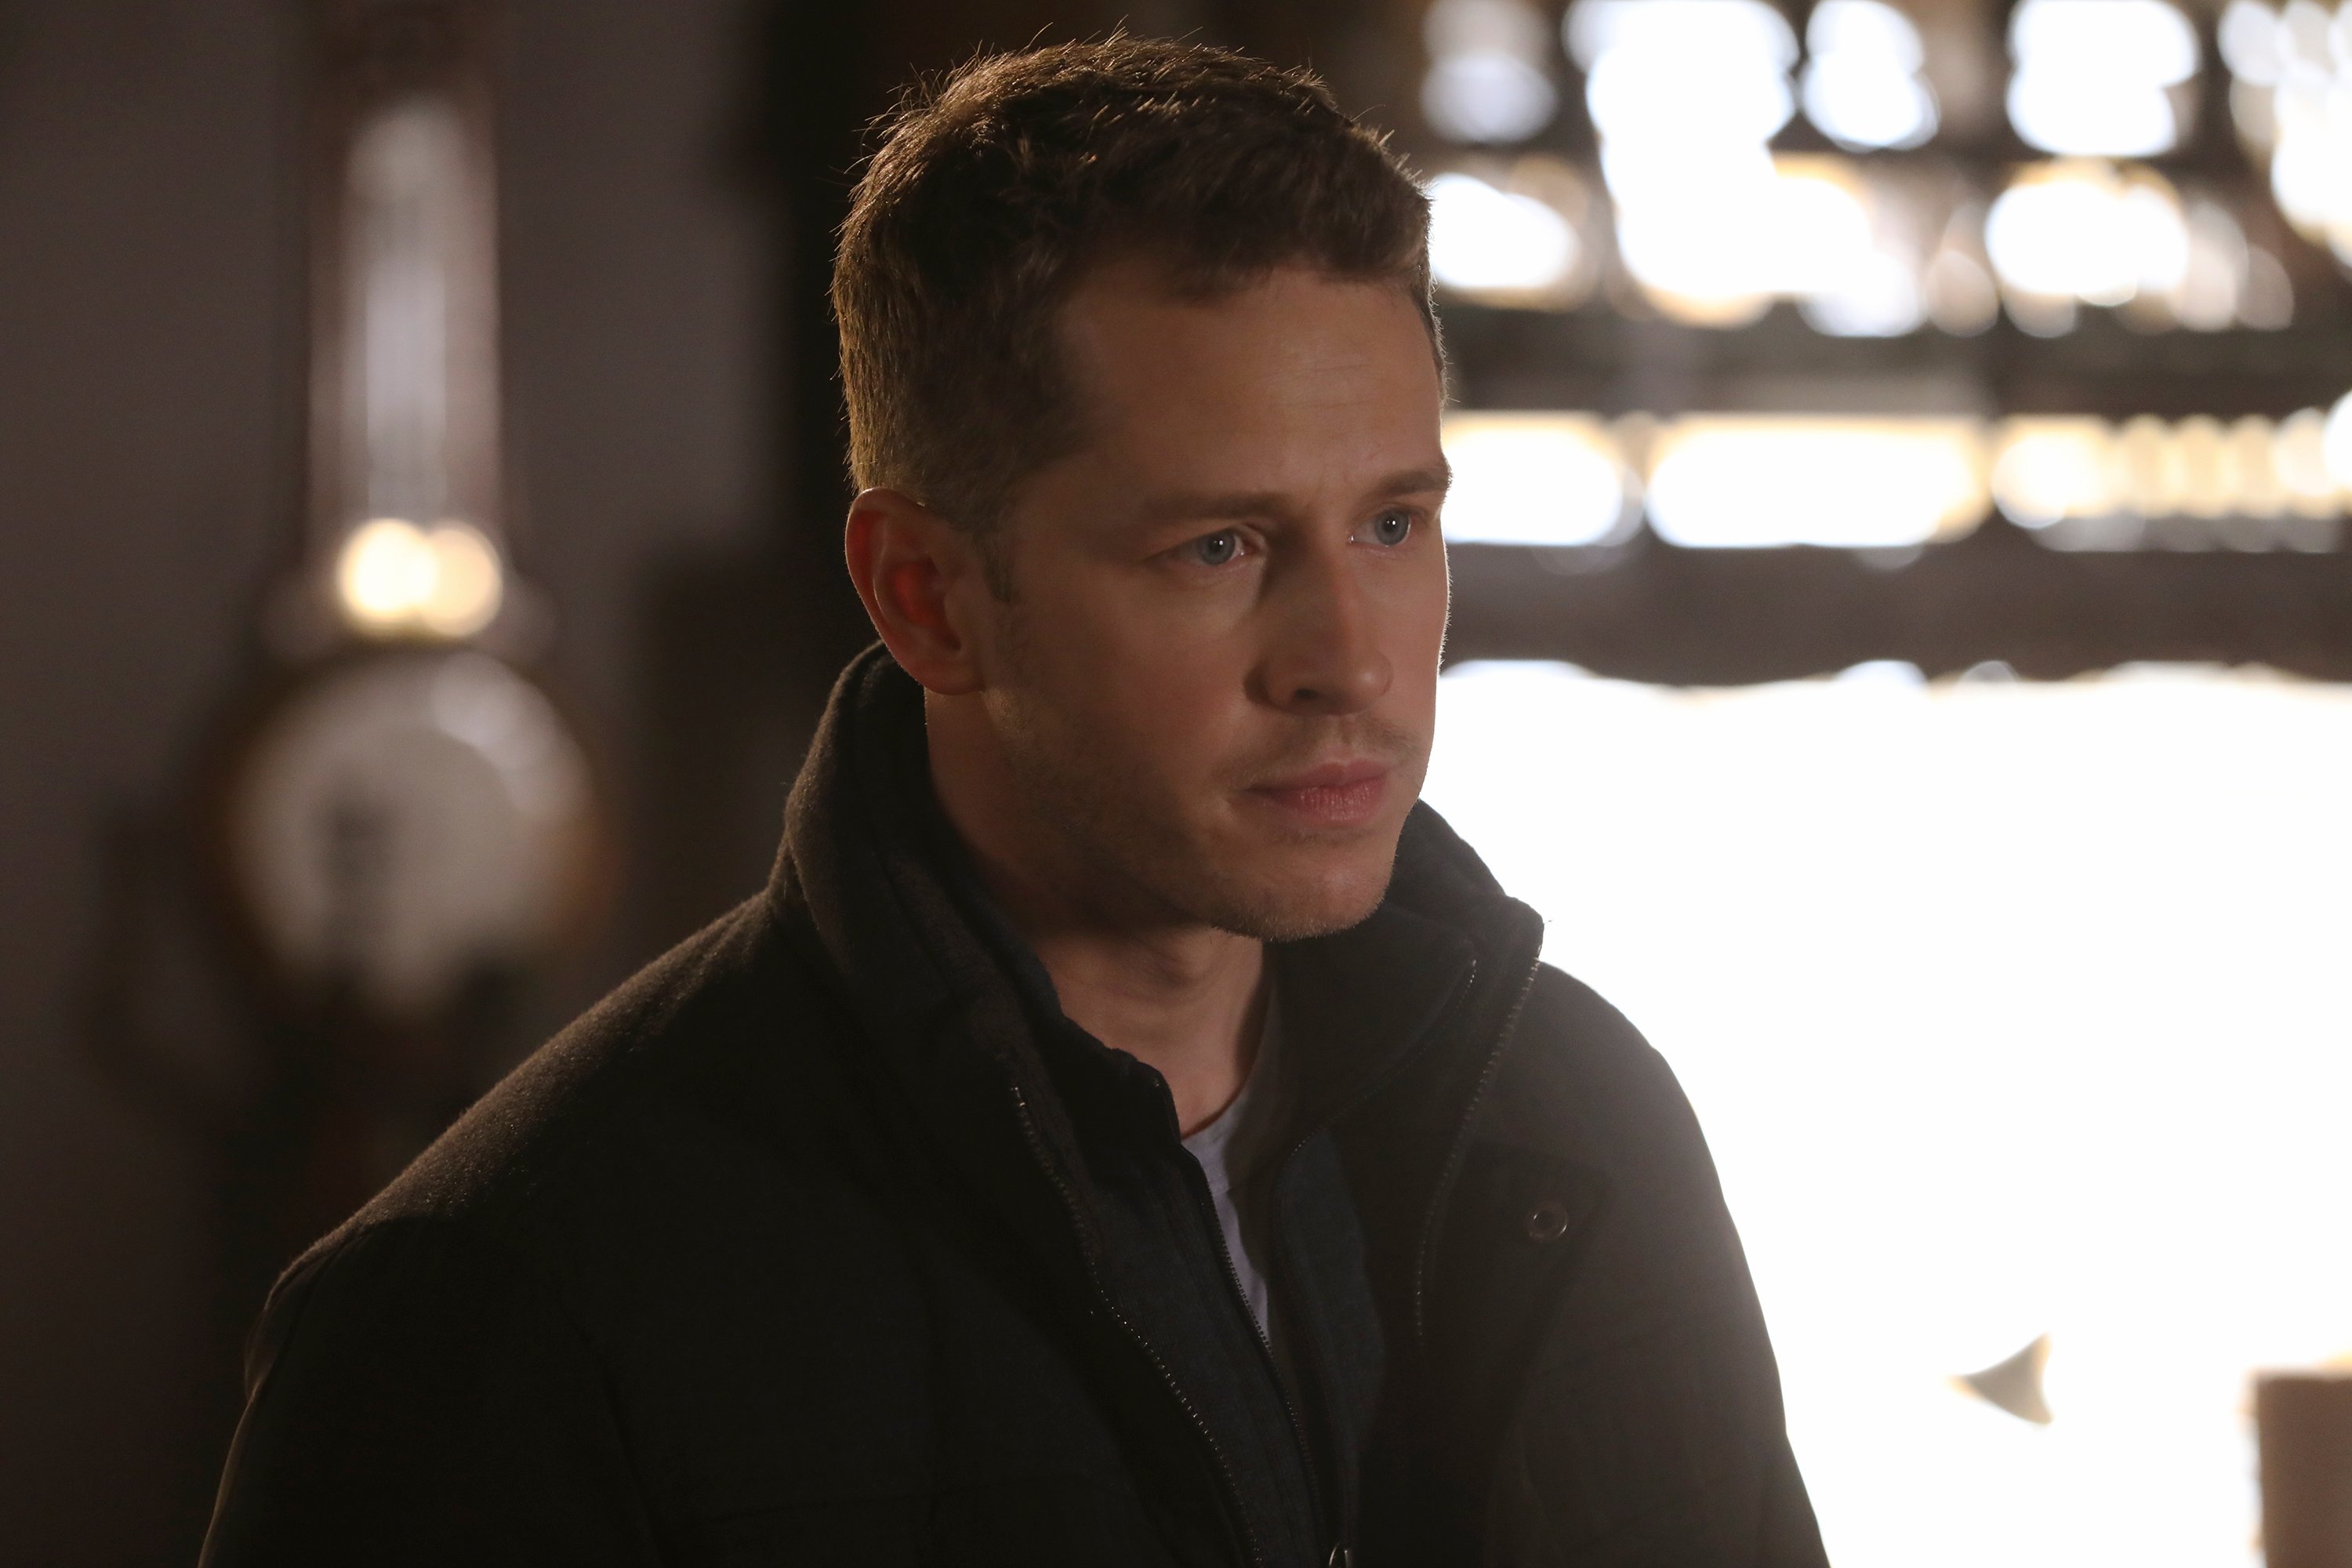 'Once Upon a Time' episode titled 'Awake,' starring Josh Dallas as Prince Charming